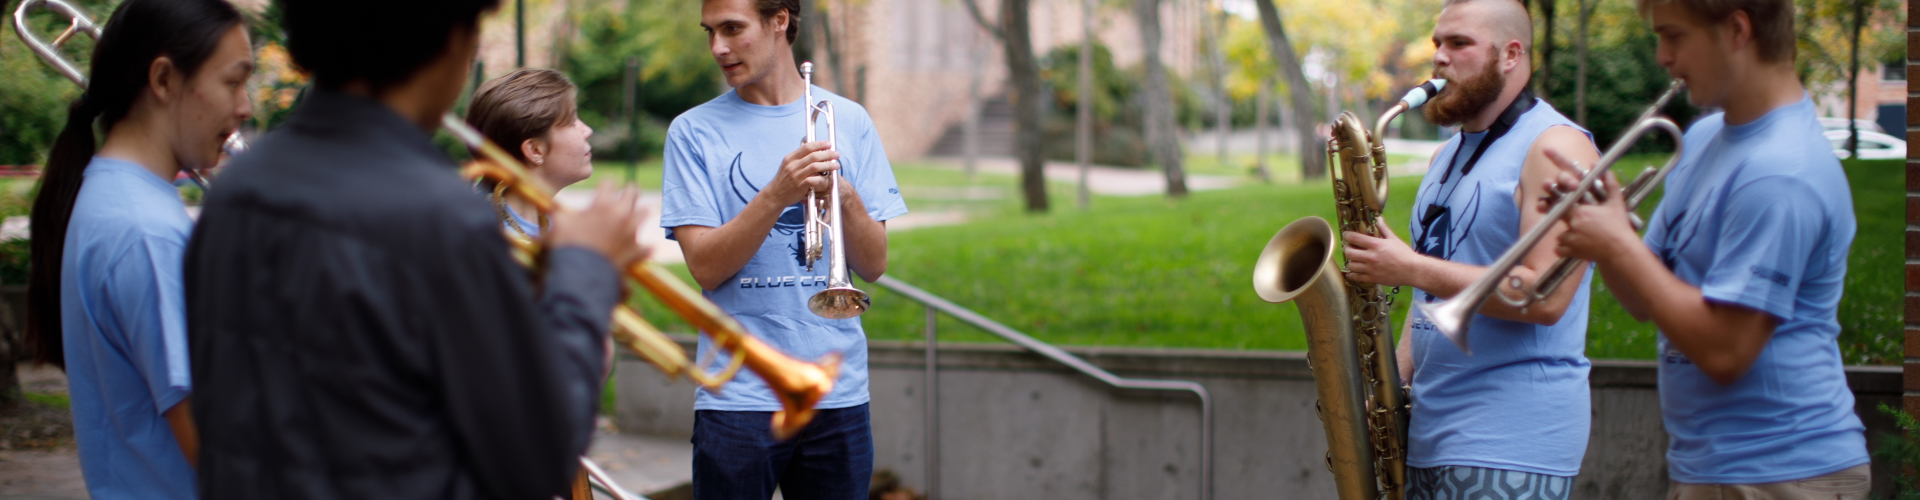 Students playing instruments in front of Old Main during Paint Bellingham Blue